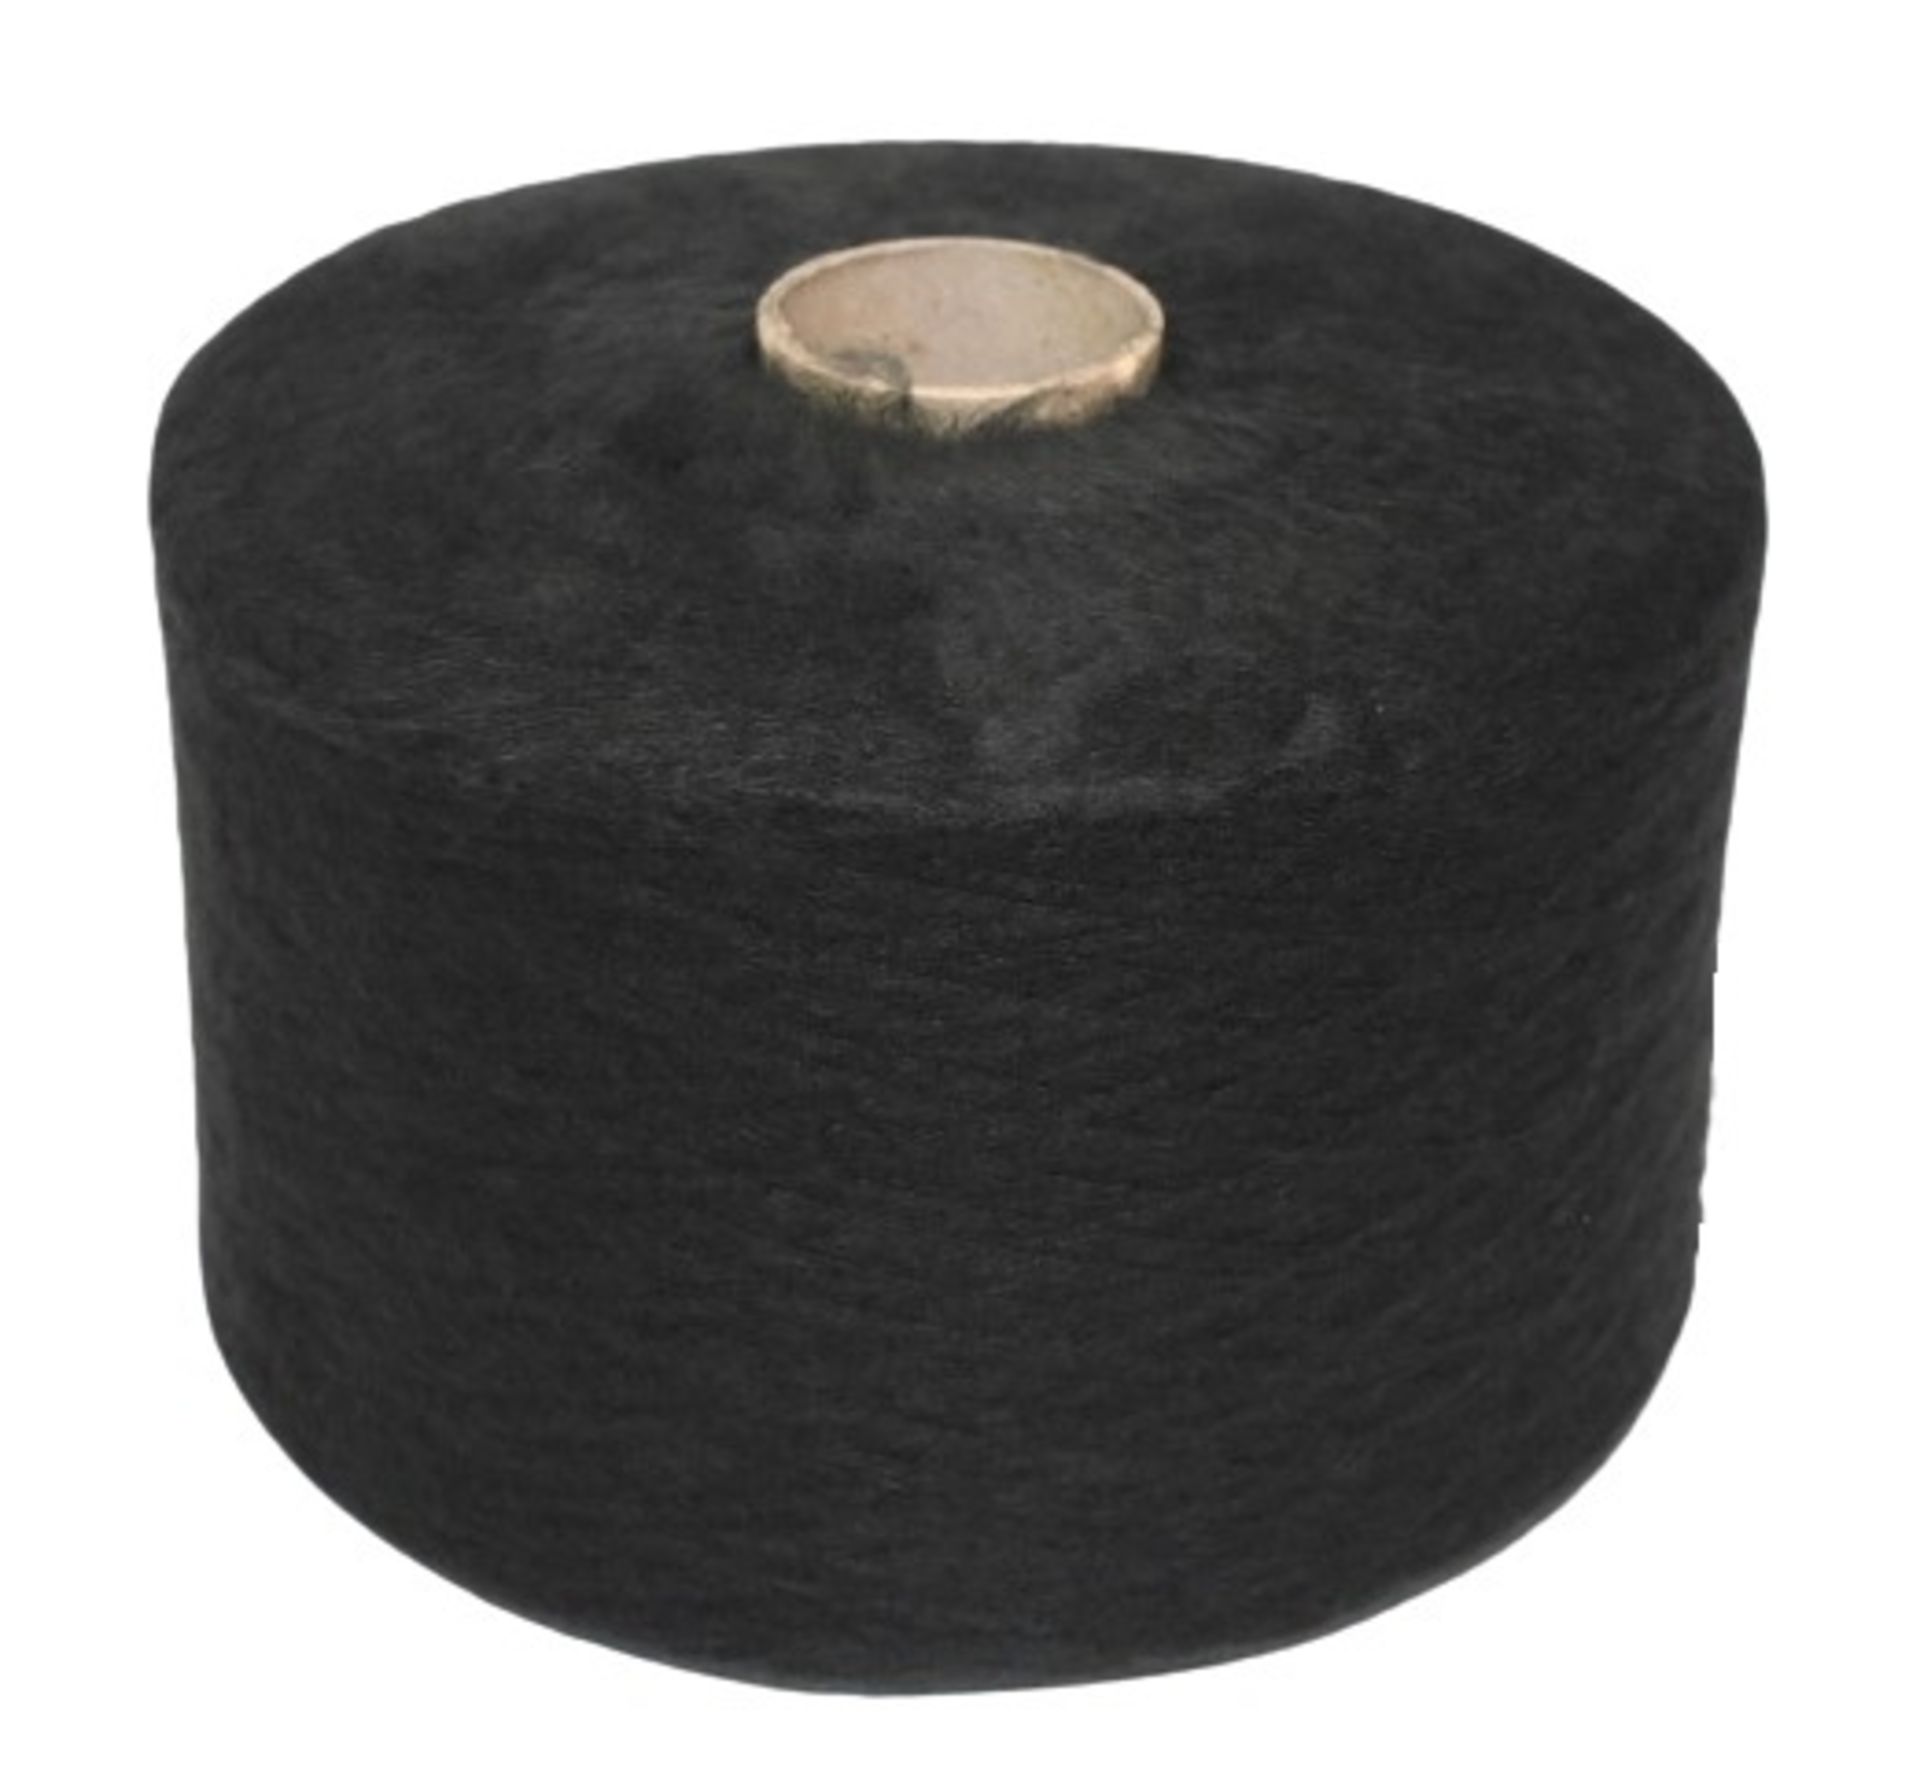 36 x Cones of 1/7,5 Lagona Knitting Yarn - Charcoal - Approx Weight: 2,300g - New Stock ABL Yarn - Image 2 of 11